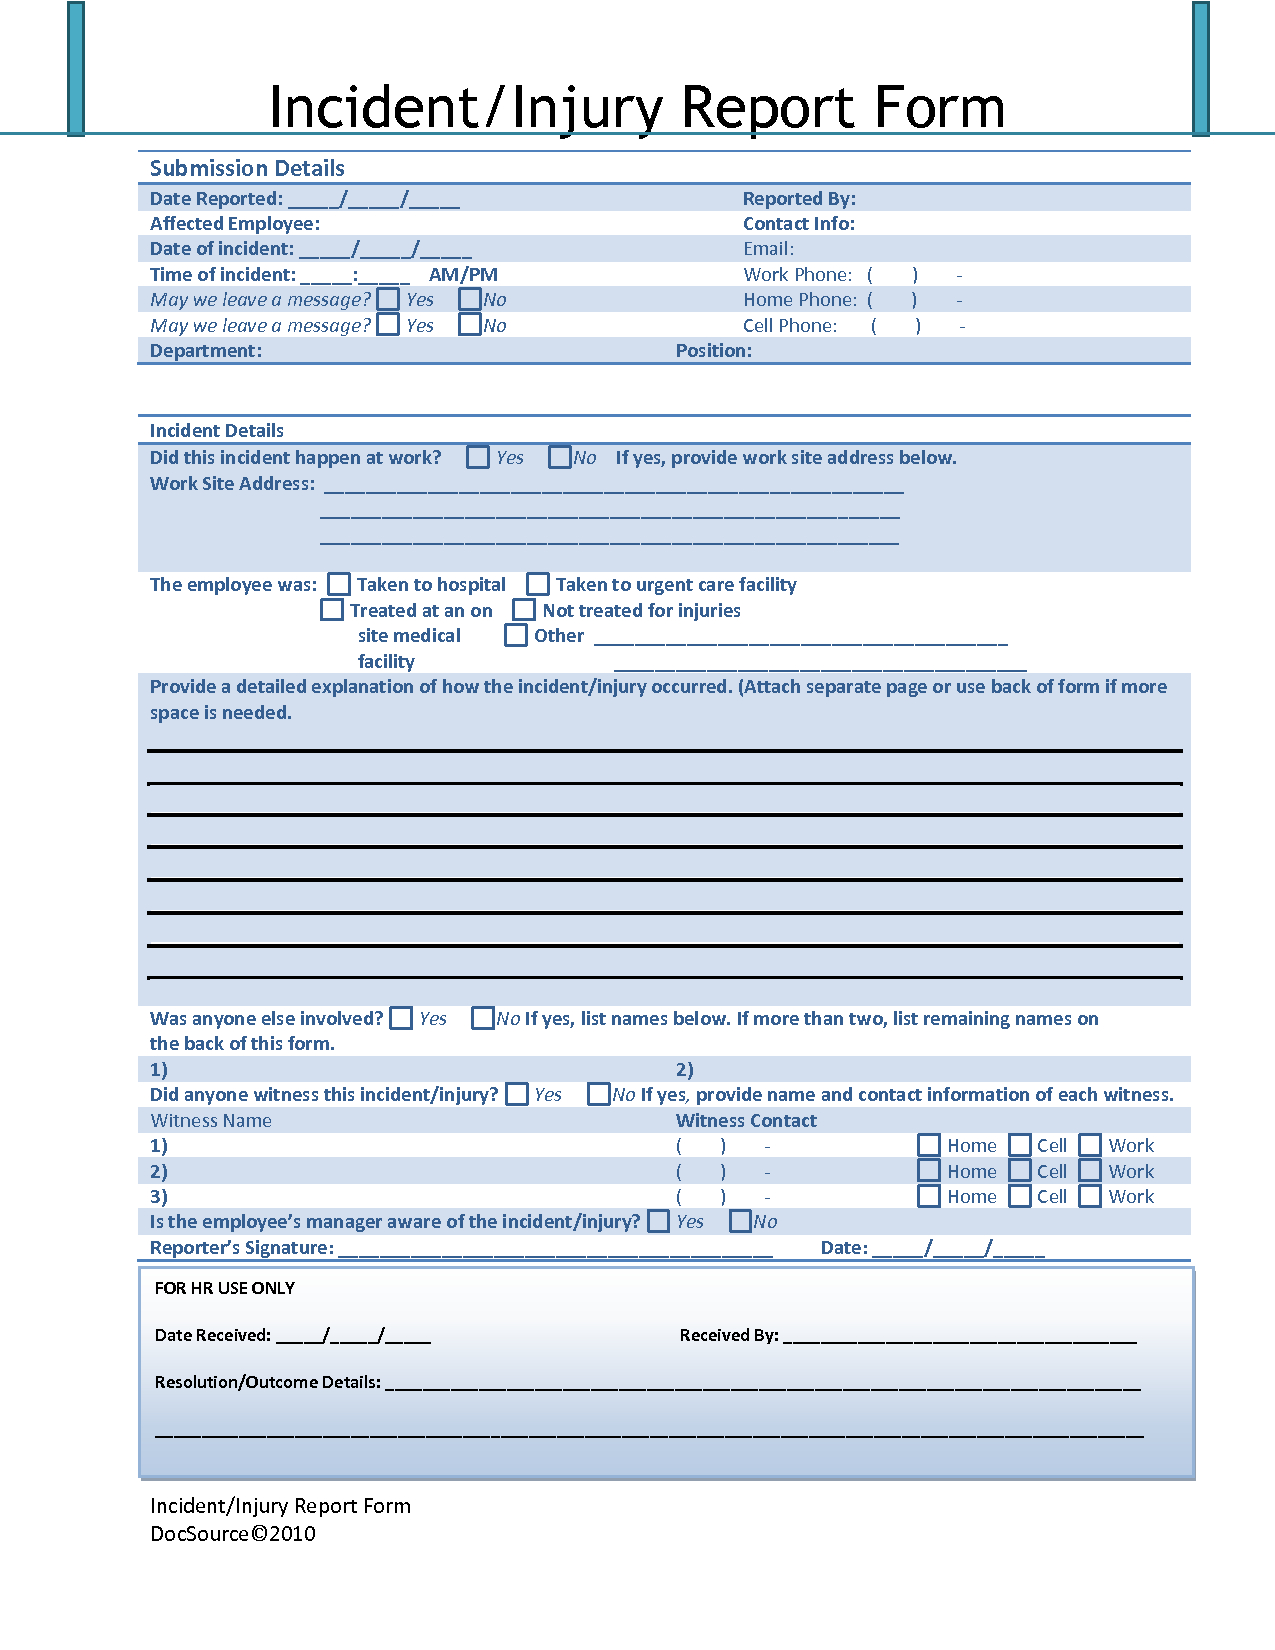 Effective Accident Injury Report Form Template With Blue Regarding Injury Report Form Template